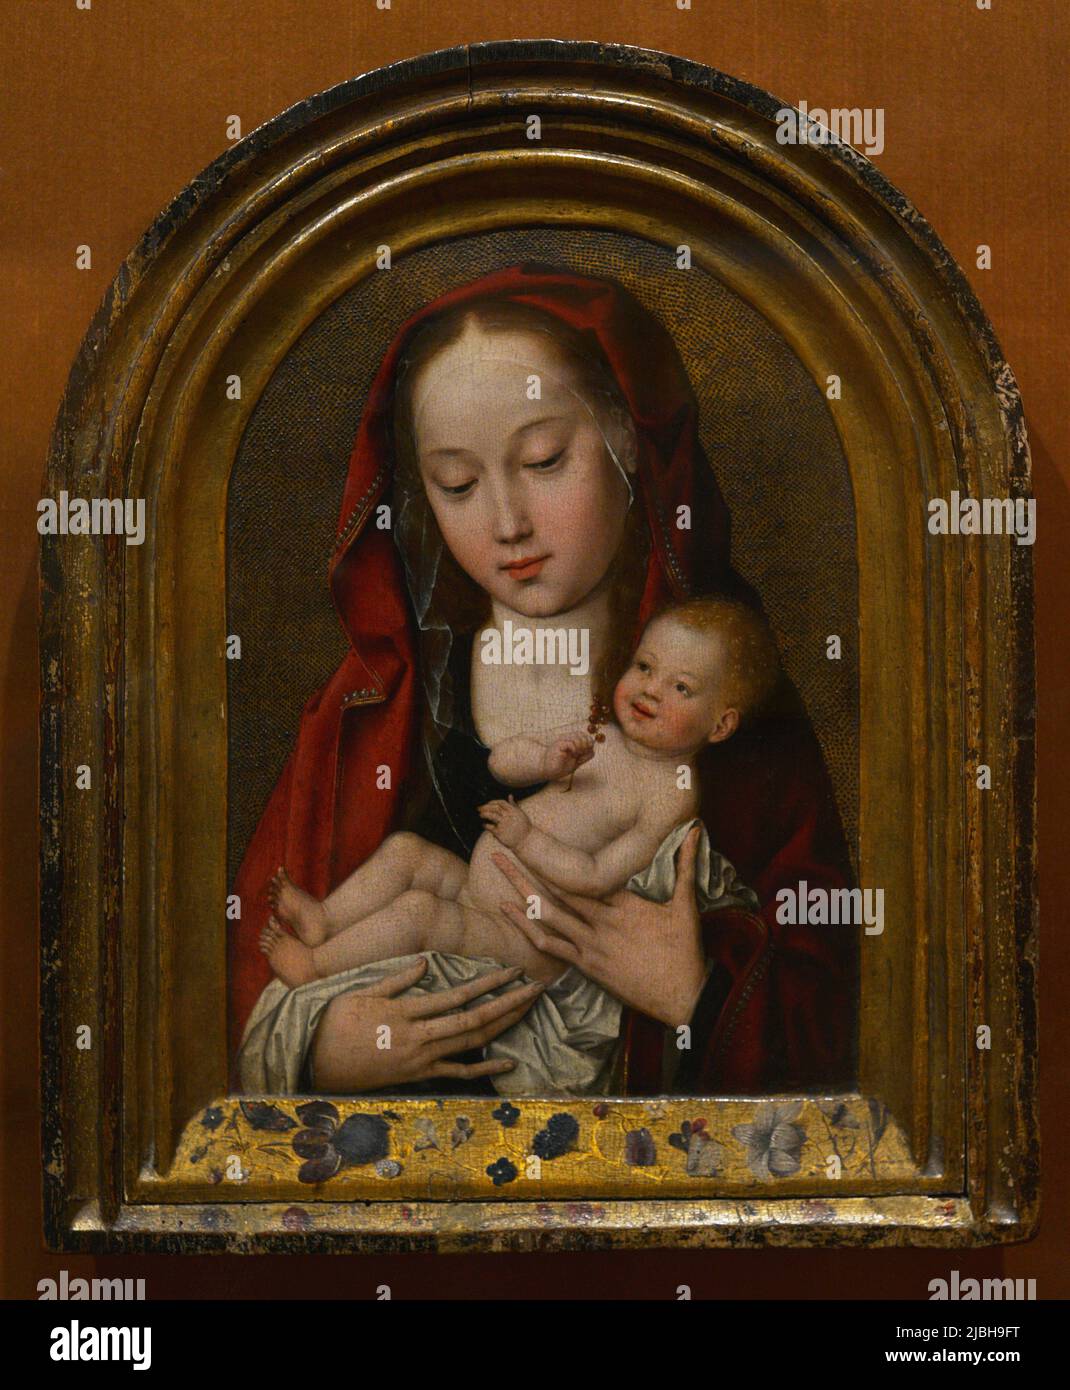 Virgin and Child, ca. 1485-1490. Unknown artist. Flanders. Tempera and oil (?) on wood. Calouste Gulbenkian Museum. Lisbon, Portugal. Stock Photo